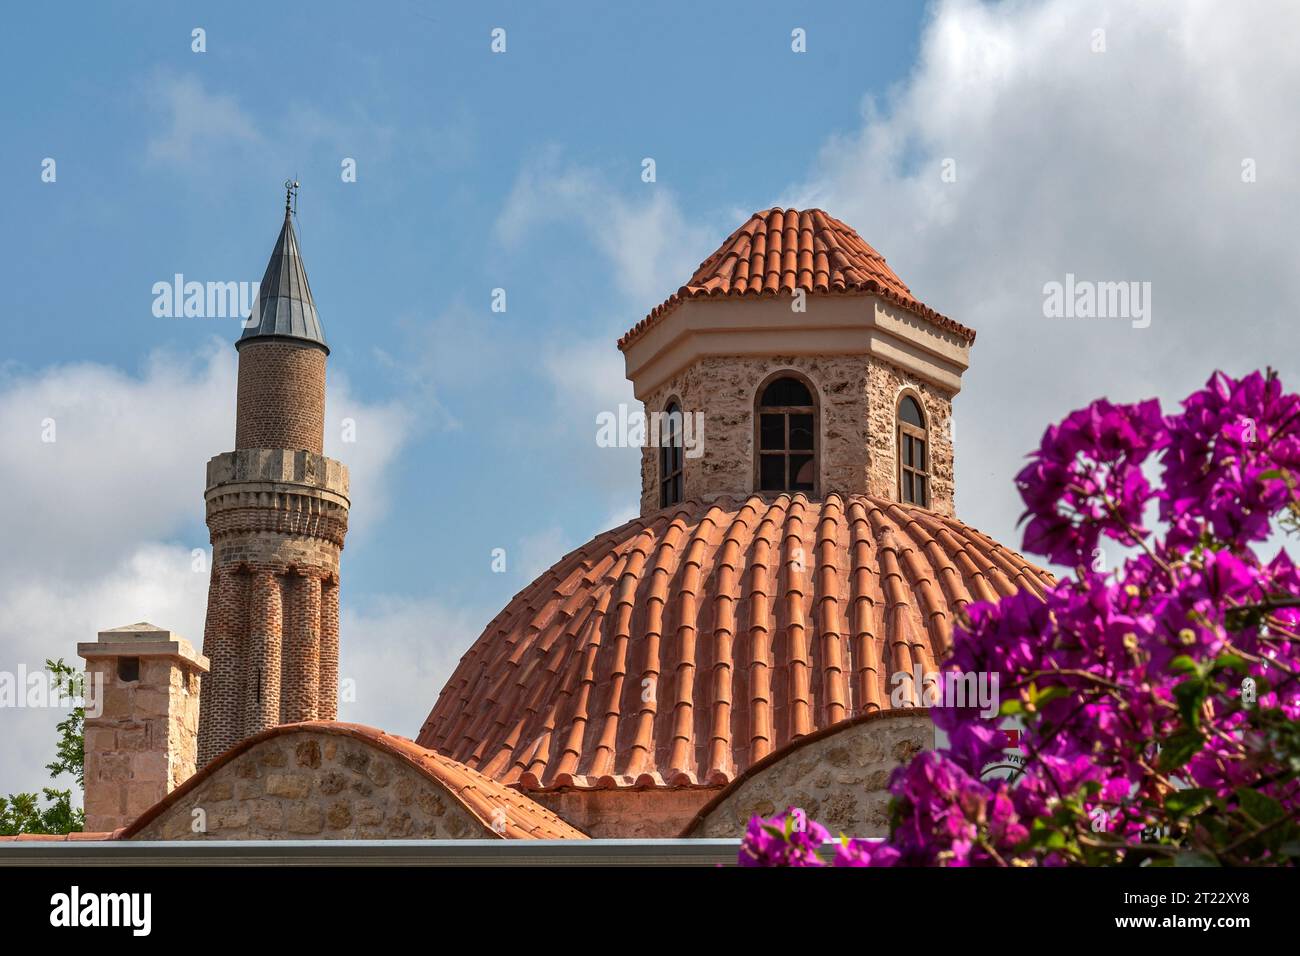 Exterior view of The Gallery of fine arts in Antalya,Turkey Stock Photo